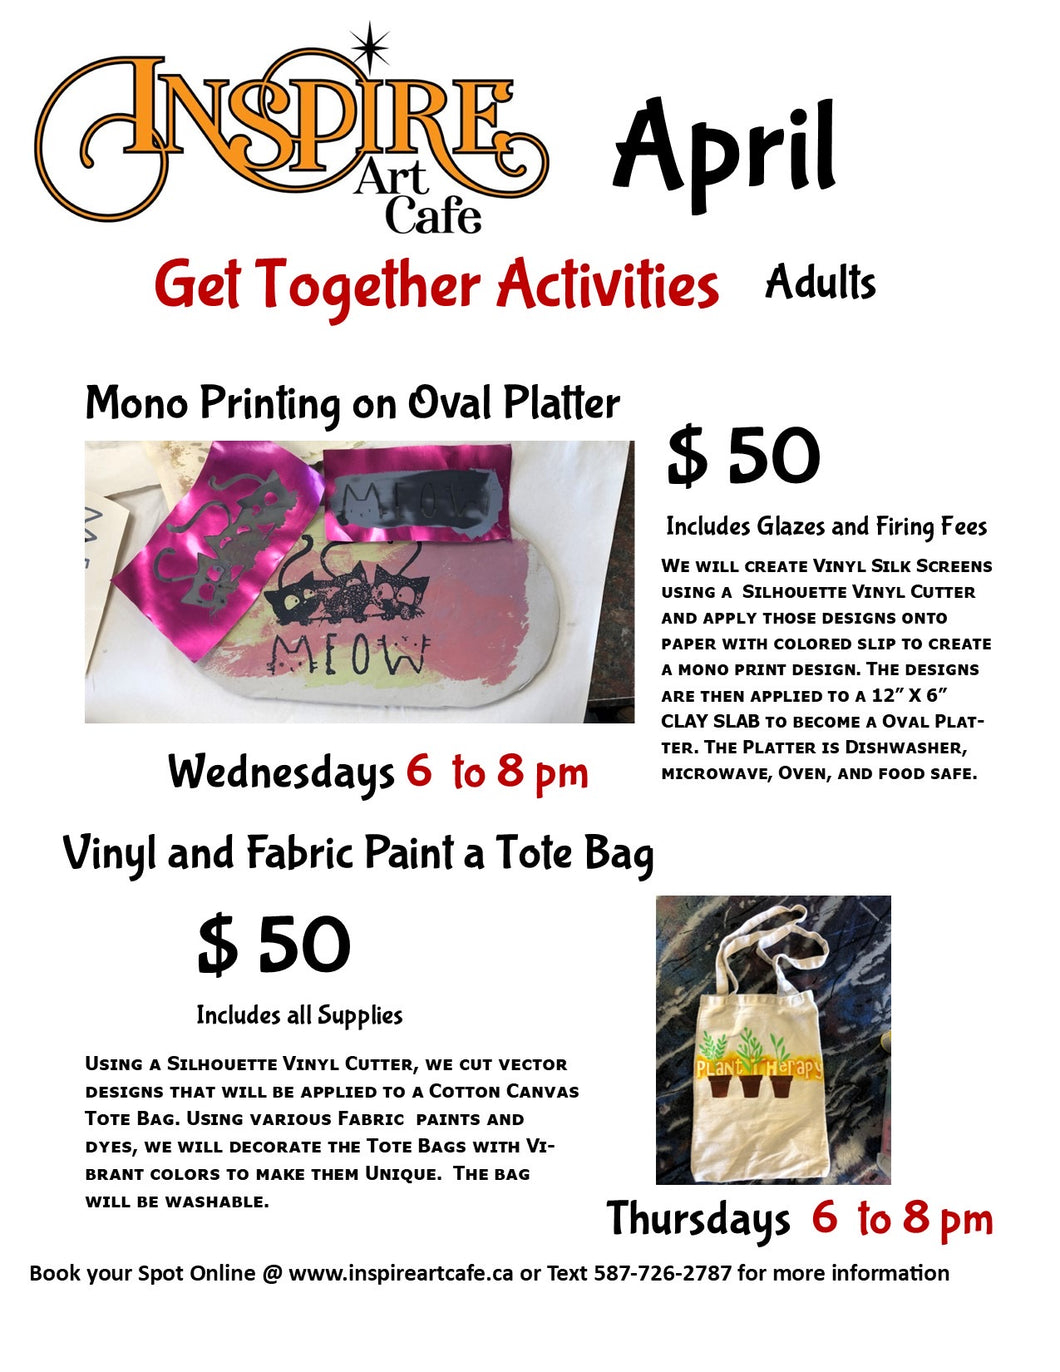 Get Together Activity Vinyl and Paint a Tote Bag April 25